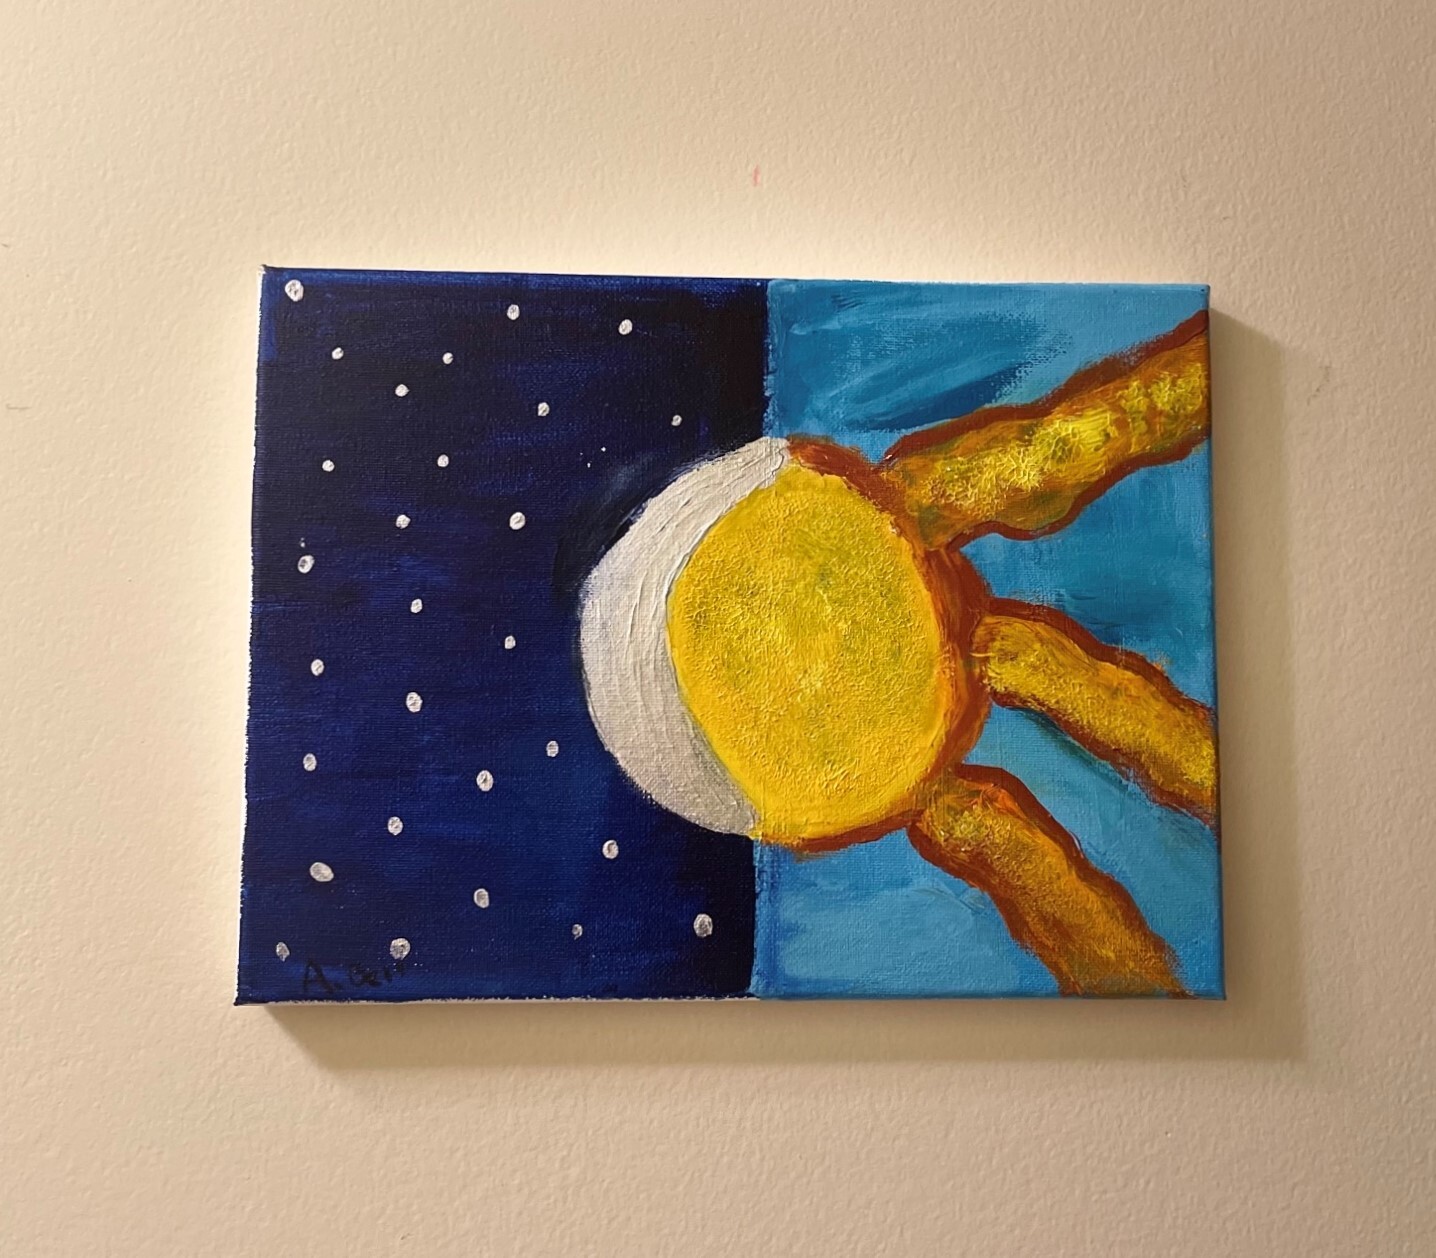 Eclipse: 9x12" original canvas acrylic painting by artist Ann Bell.